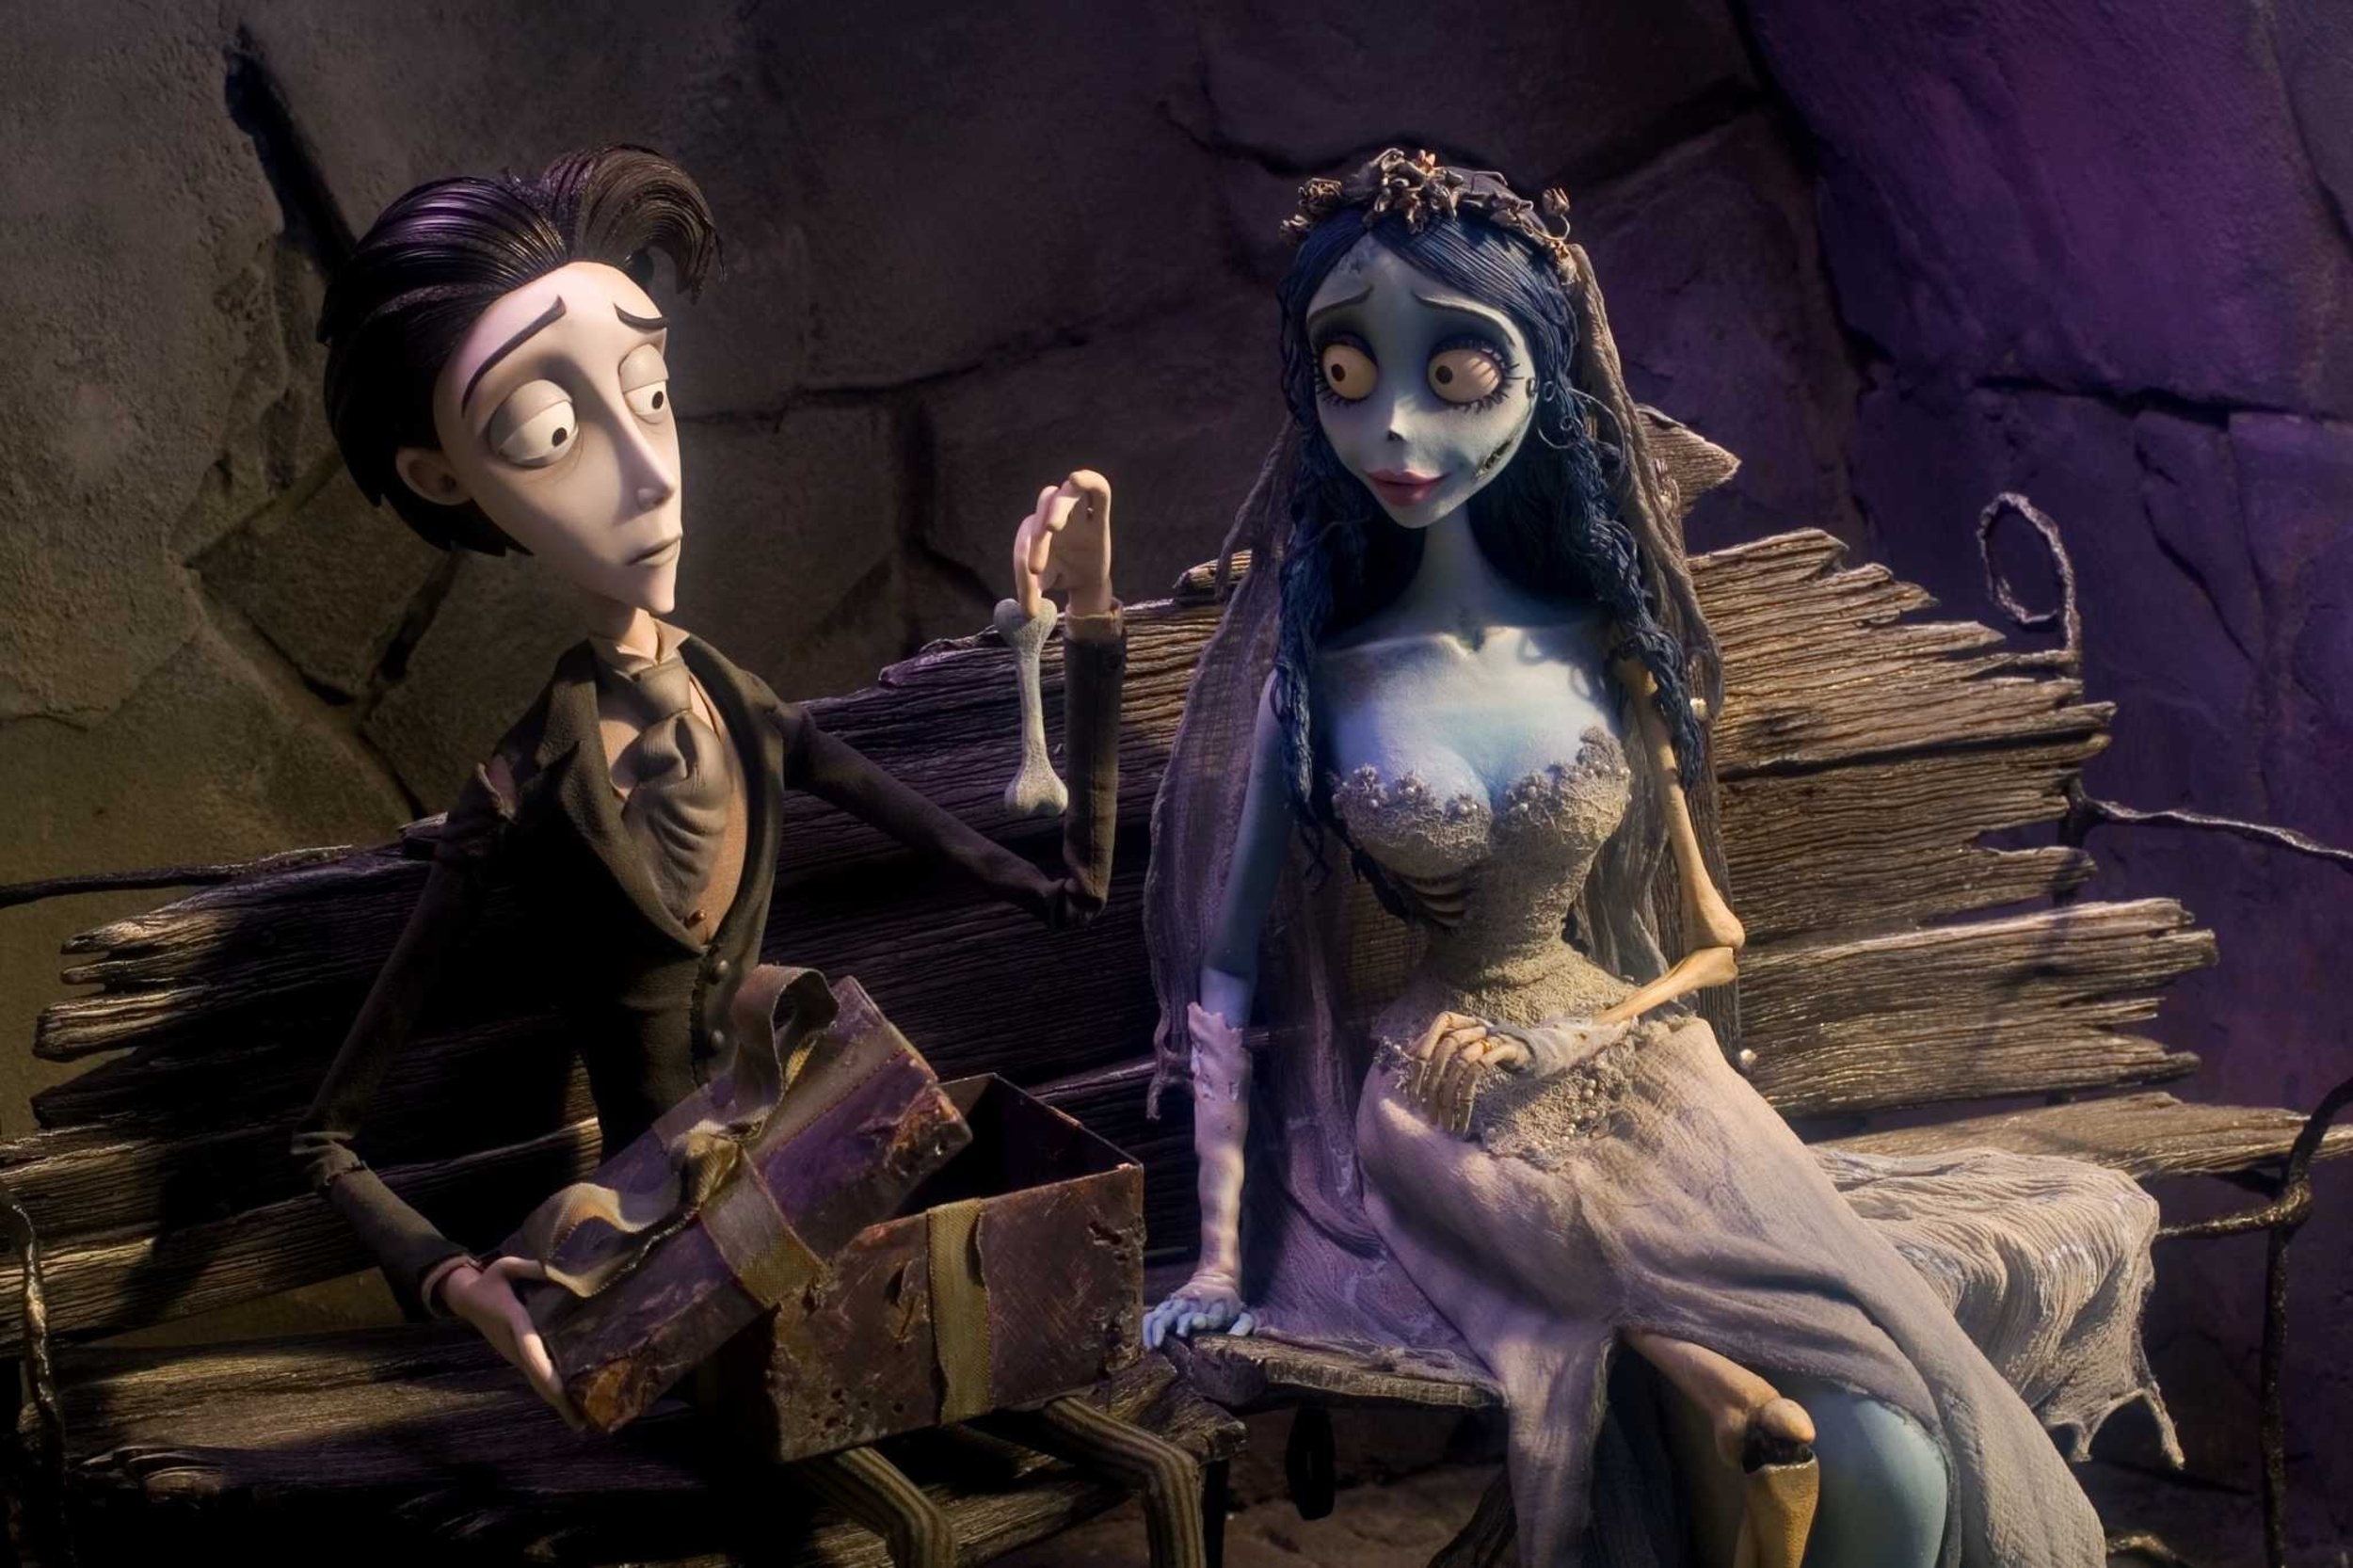 <p>Tim Burton is another of those directors whose name has been indelibly associated with dark fantasy. In <span><em>Corpse Bride</em>, </span>which he co-directed with Mike Johnson, he brings his usual style and flair to the story of Victor Van Dort, who inadvertently marries the titular corpse bride and finds himself in the Land of the Dead. This film has all of the traits one associates with the Burton style and aesthetic, and it manages to be both darkly whimsical and bittersweet. And, of course, there is also stop-motion animation, which has its own uncanny and slightly disturbing appeal.</p><p><a href='https://www.msn.com/en-us/community/channel/vid-cj9pqbr0vn9in2b6ddcd8sfgpfq6x6utp44fssrv6mc2gtybw0us'>Follow us on MSN to see more of our exclusive entertainment content.</a></p>